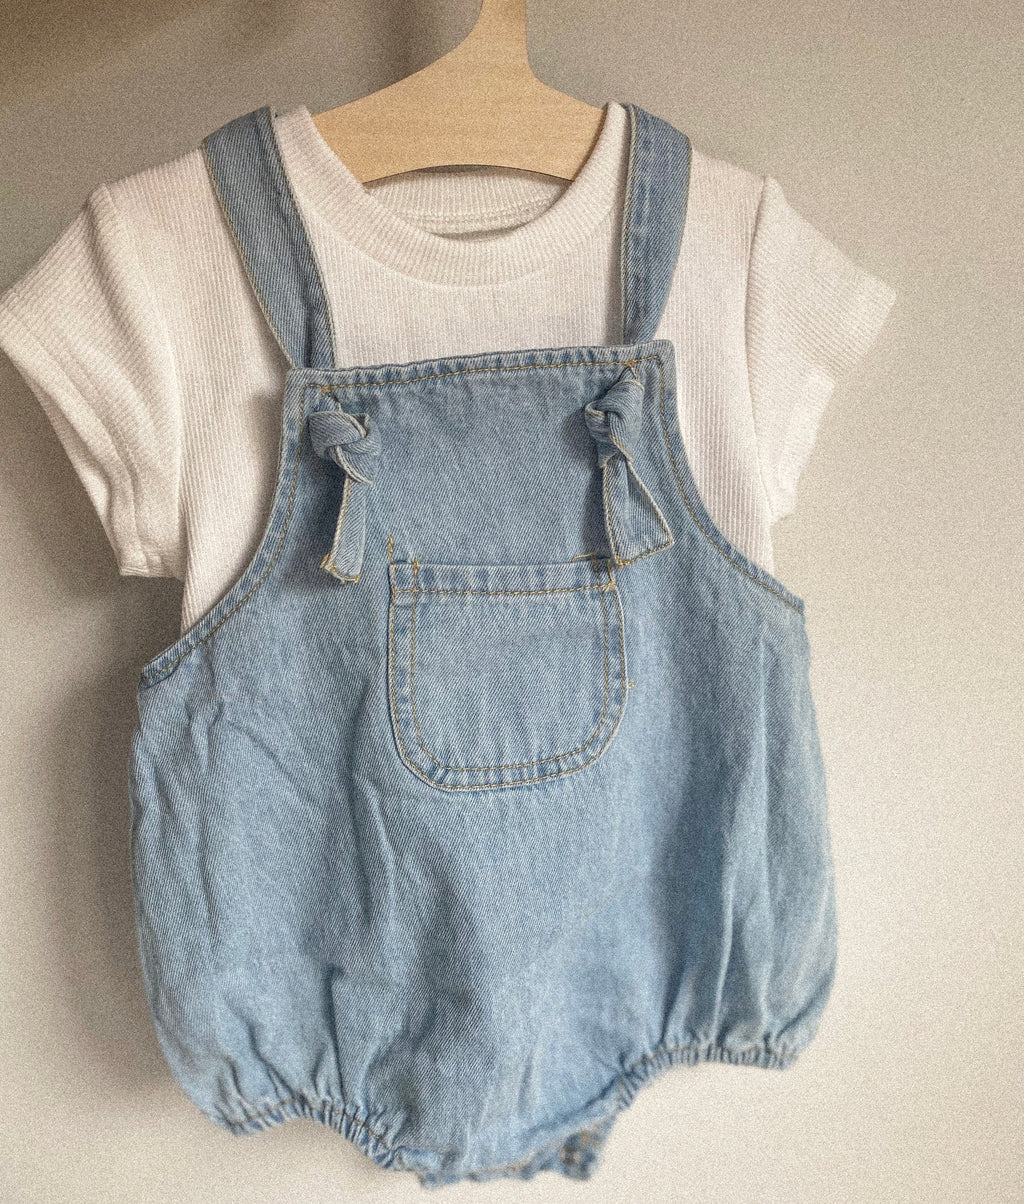 The Tully Overalls